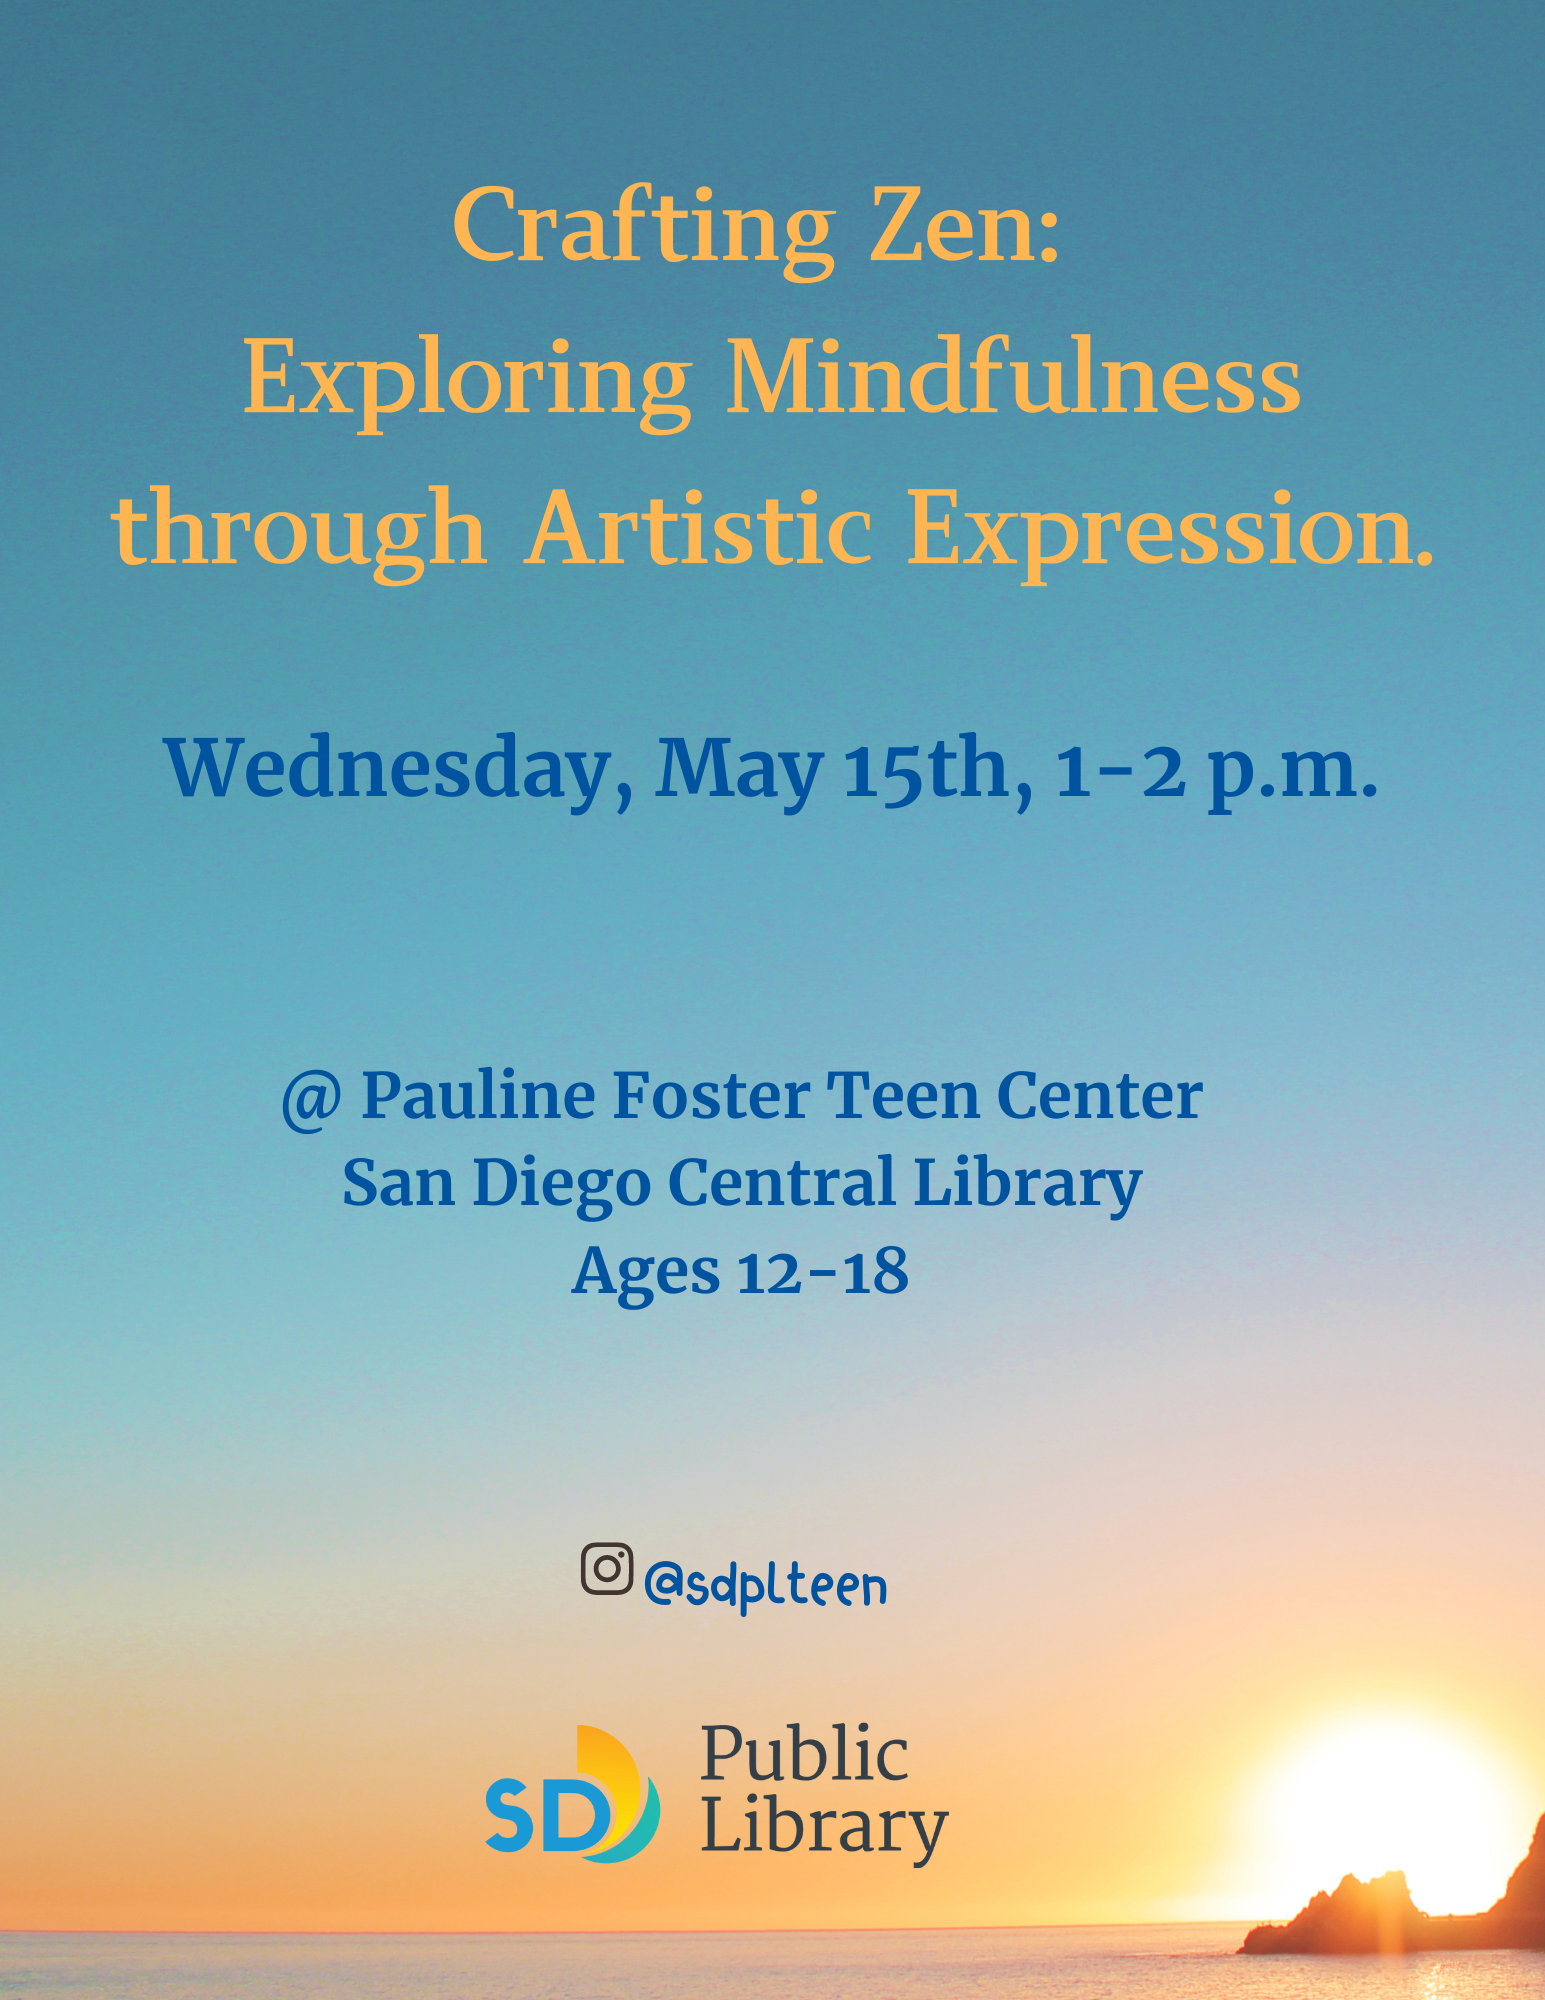 Crafting Zen:  Exploring Mindfulness through Artistic Expression. Starting Wednesday, May 15th 1-2 p.m. @ Pauline Foster Teen Center, San Diego Central Library Ages 12-18